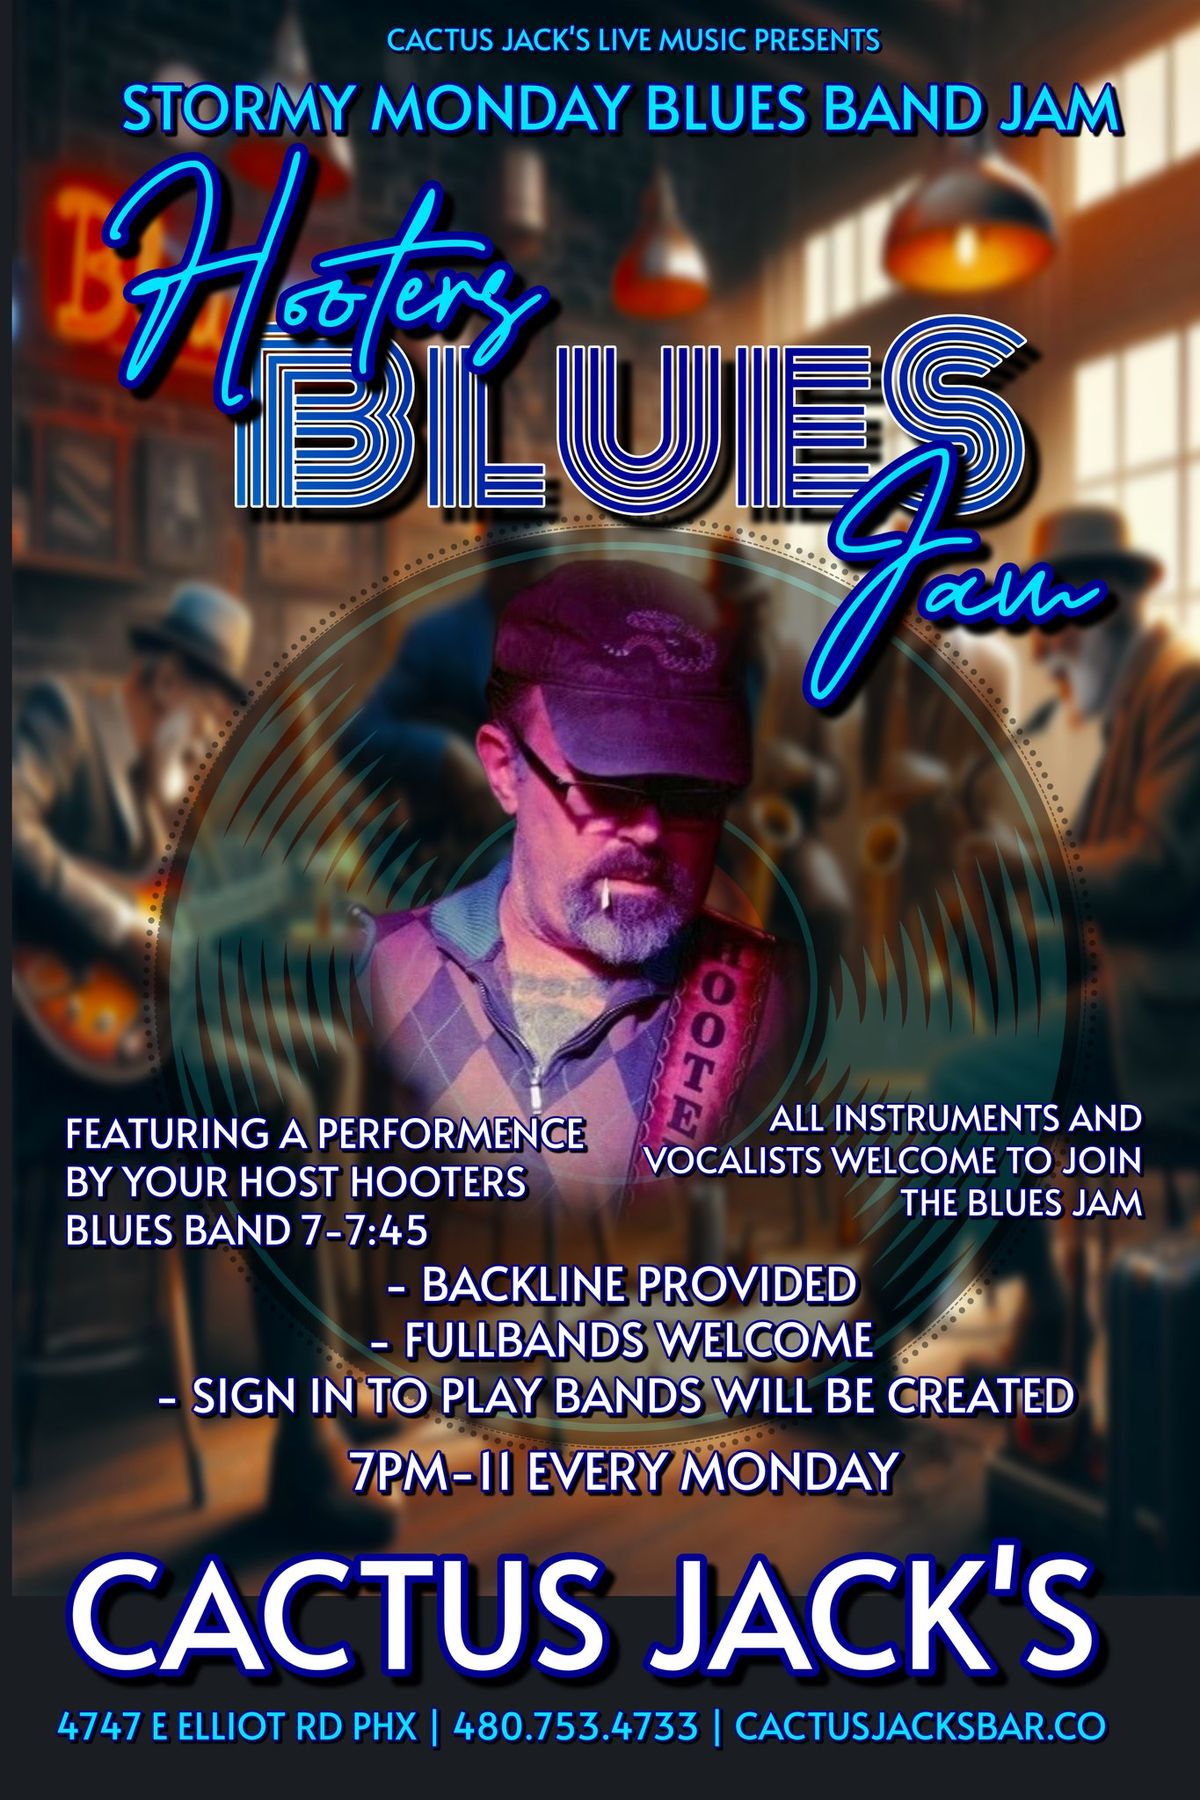 The Stormy Monday Blues Band Jam? at Cactus Jack's!